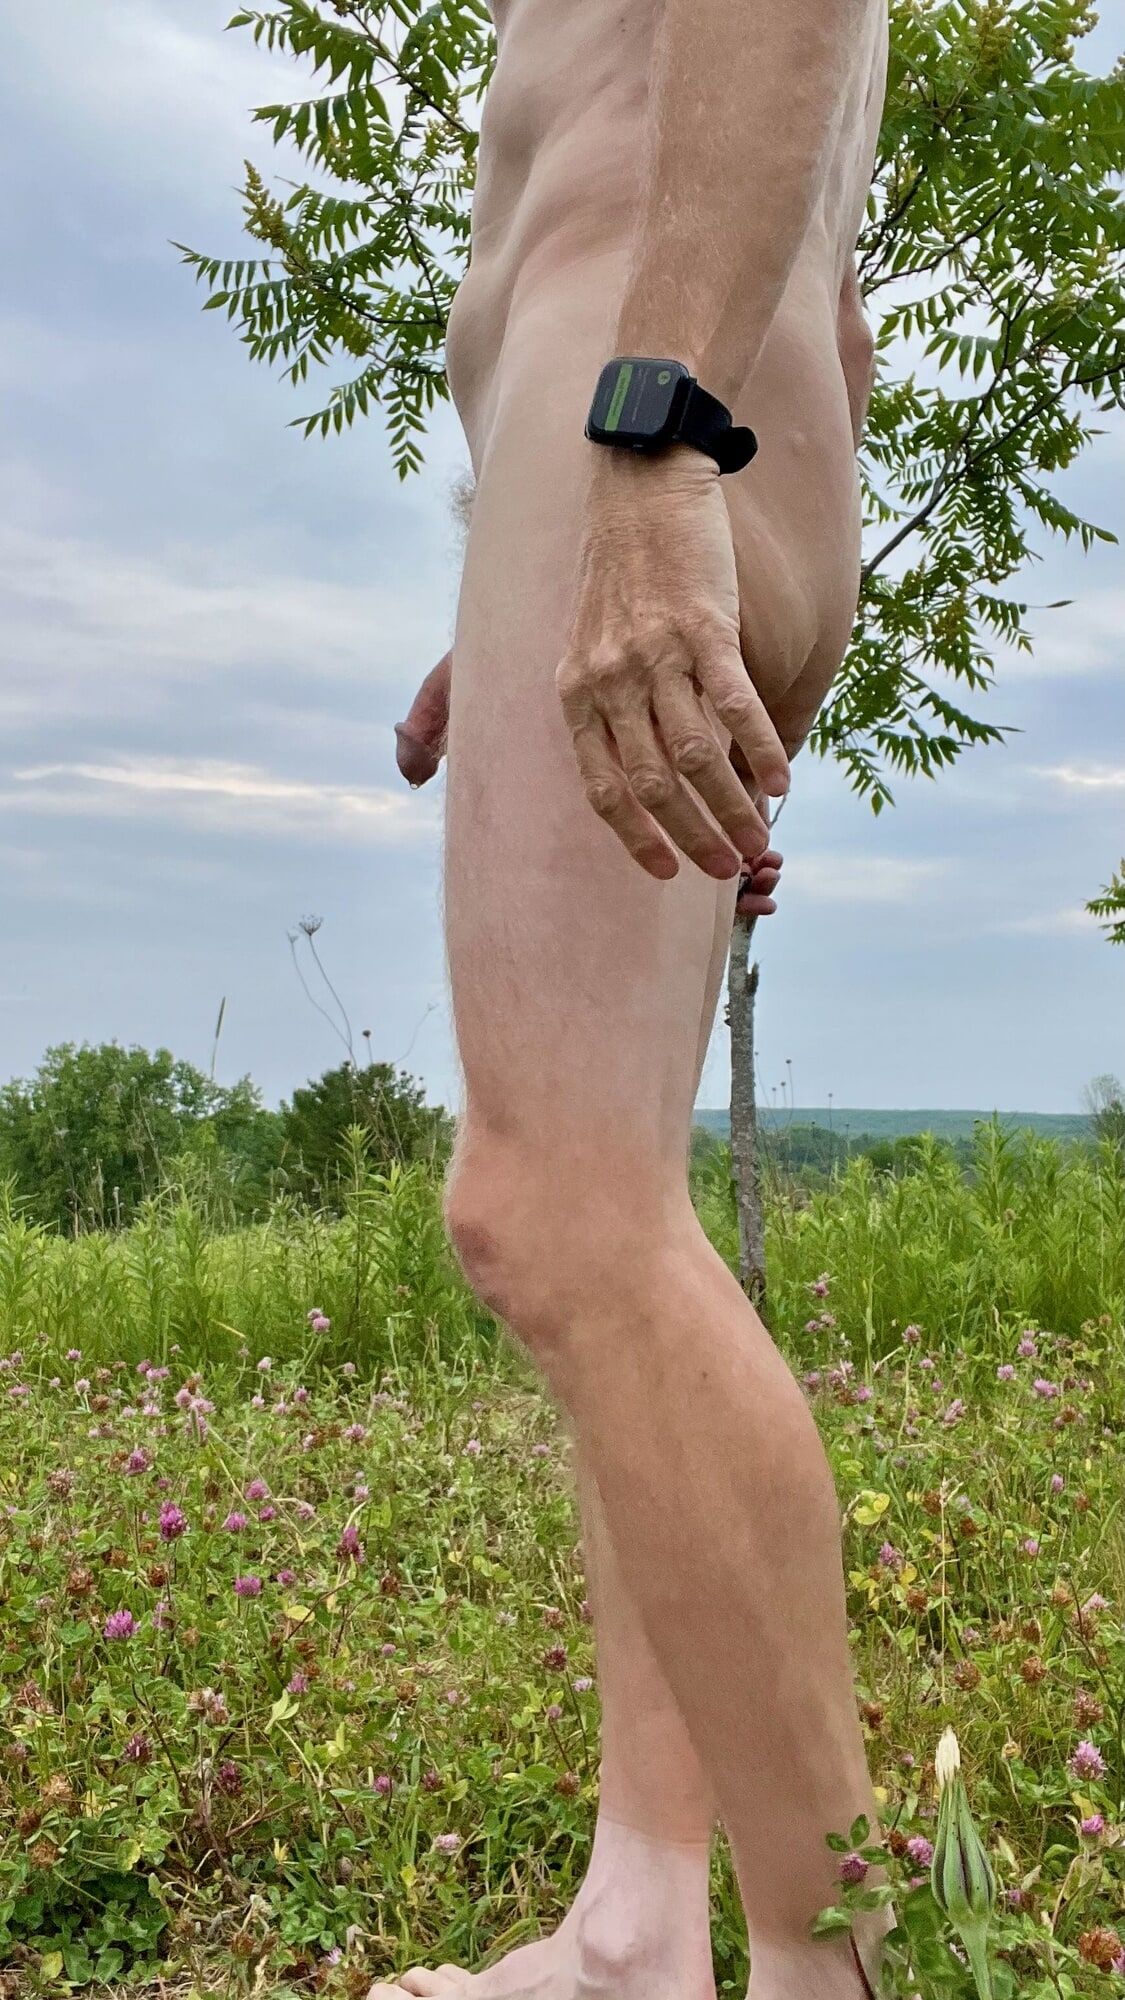 My Cock Indoors and Outdoors - Getting Naked Often #10